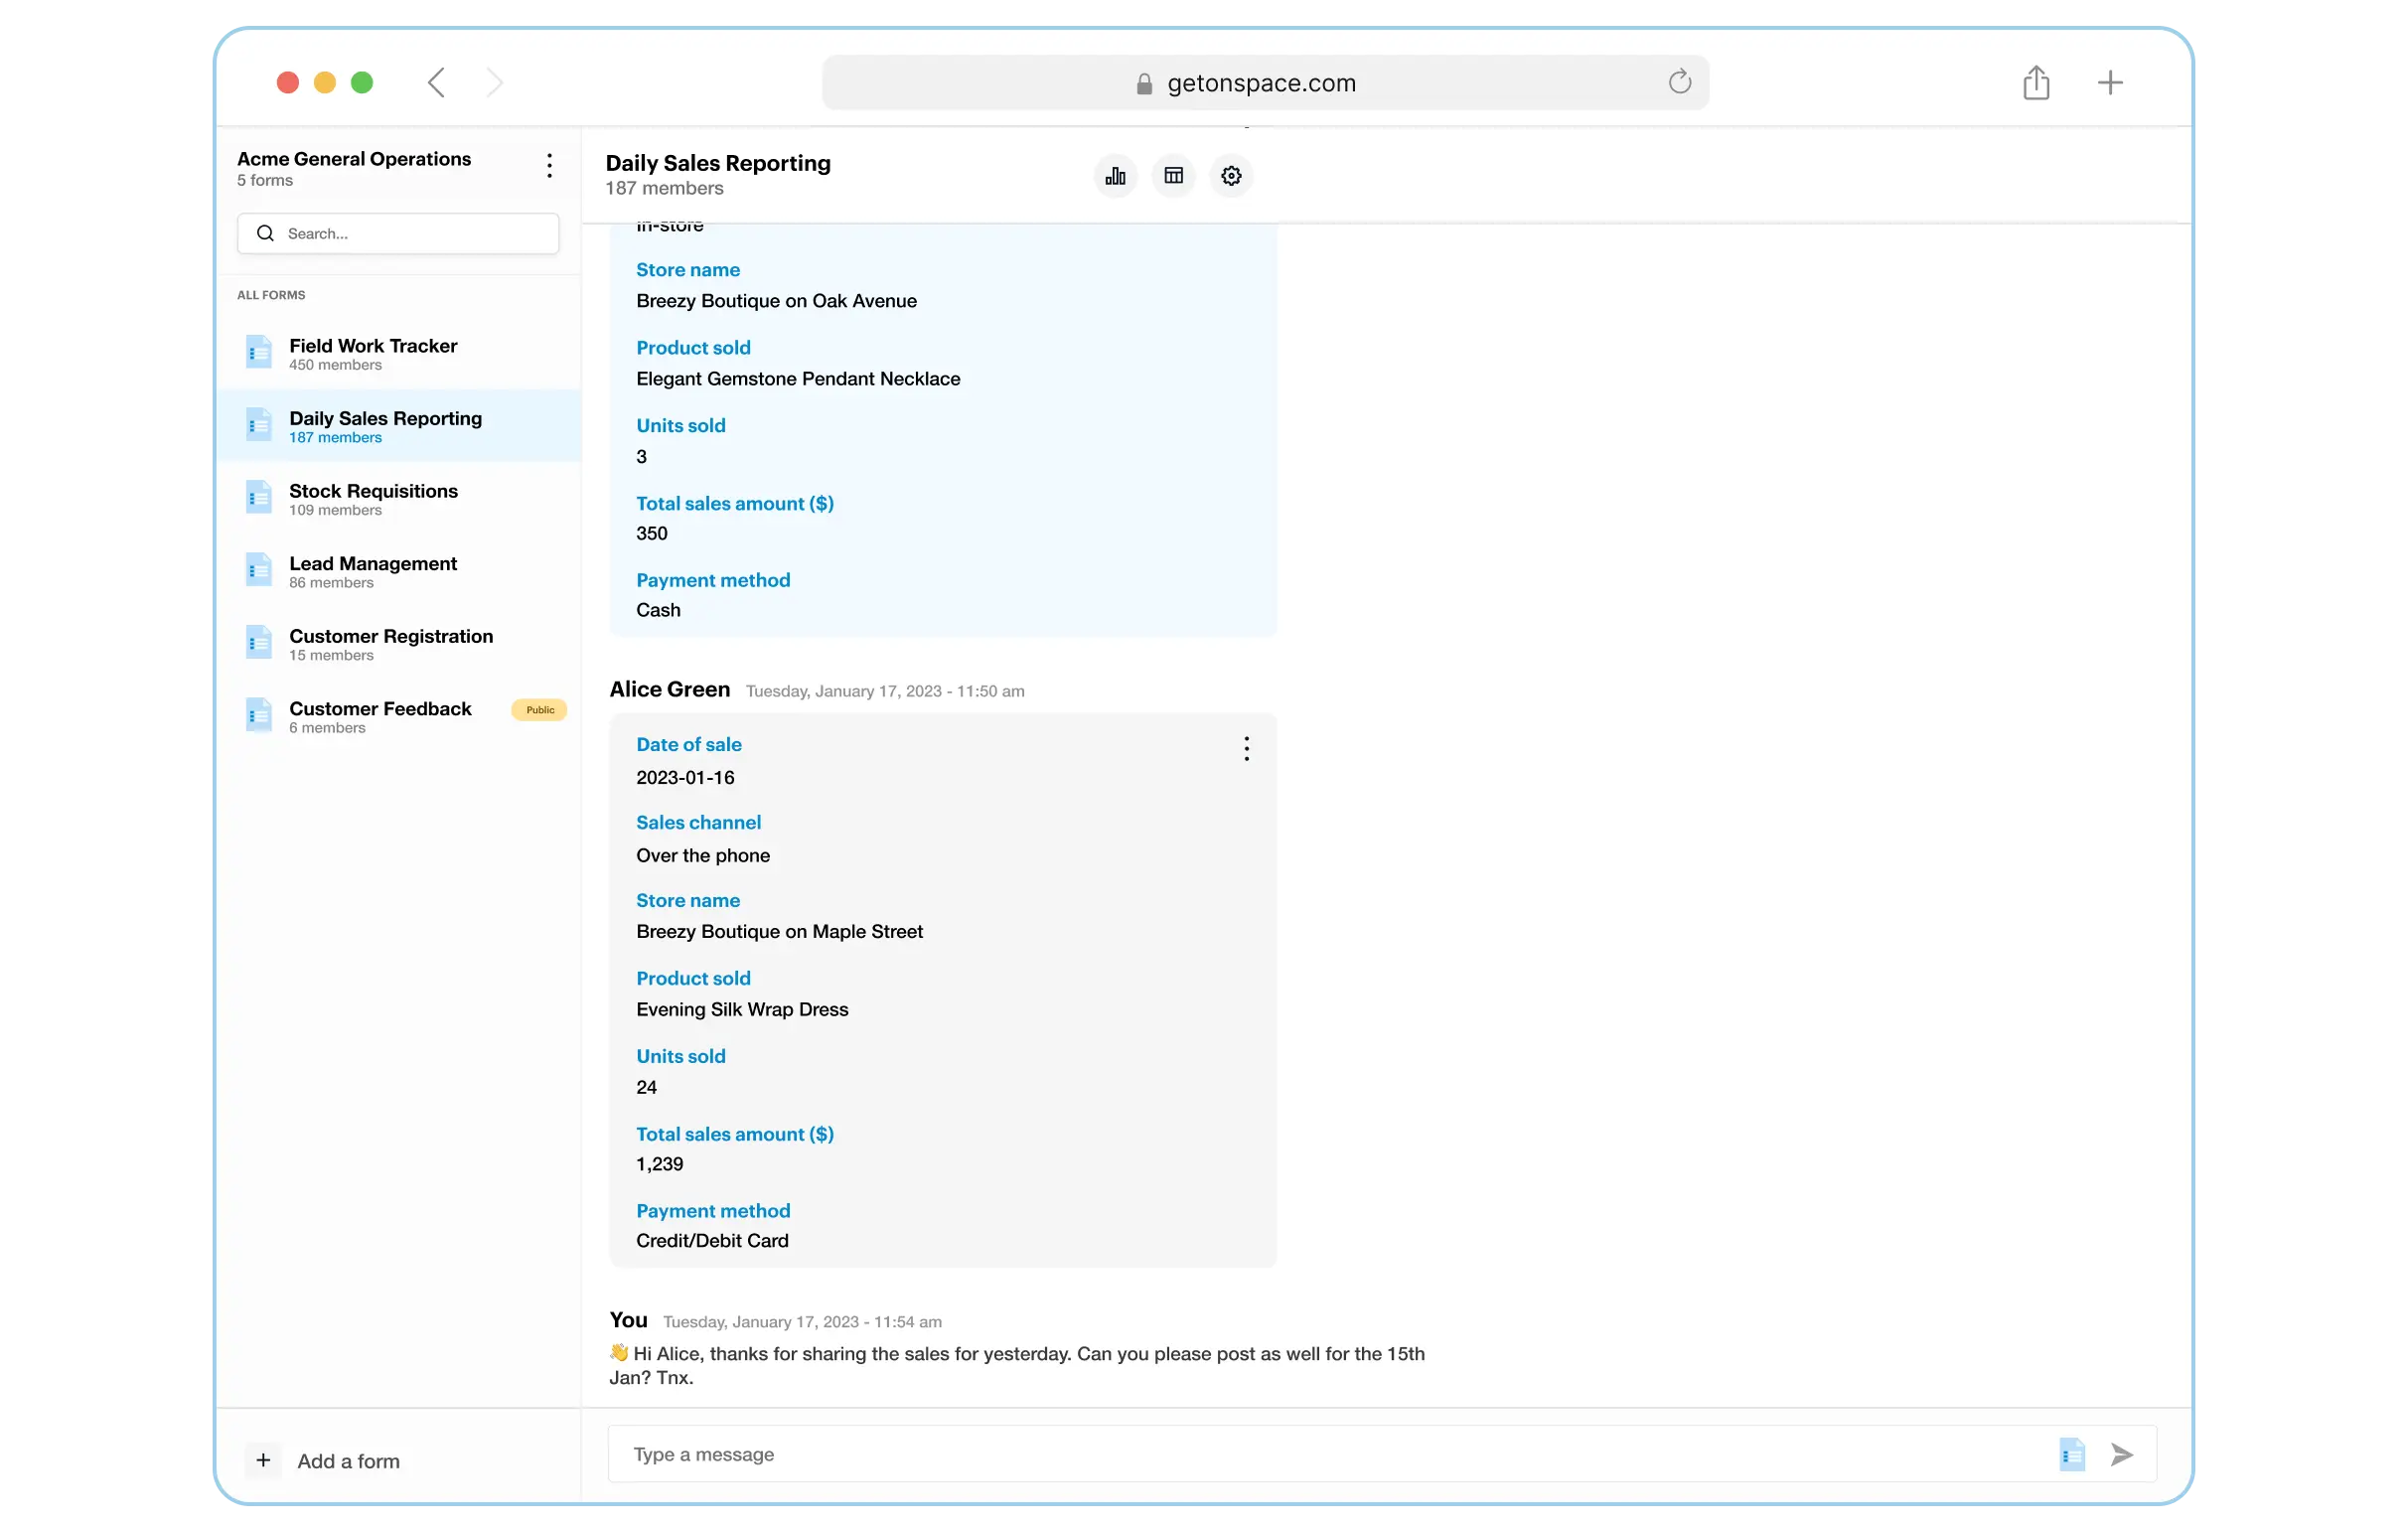 OnSpace form chat web interface